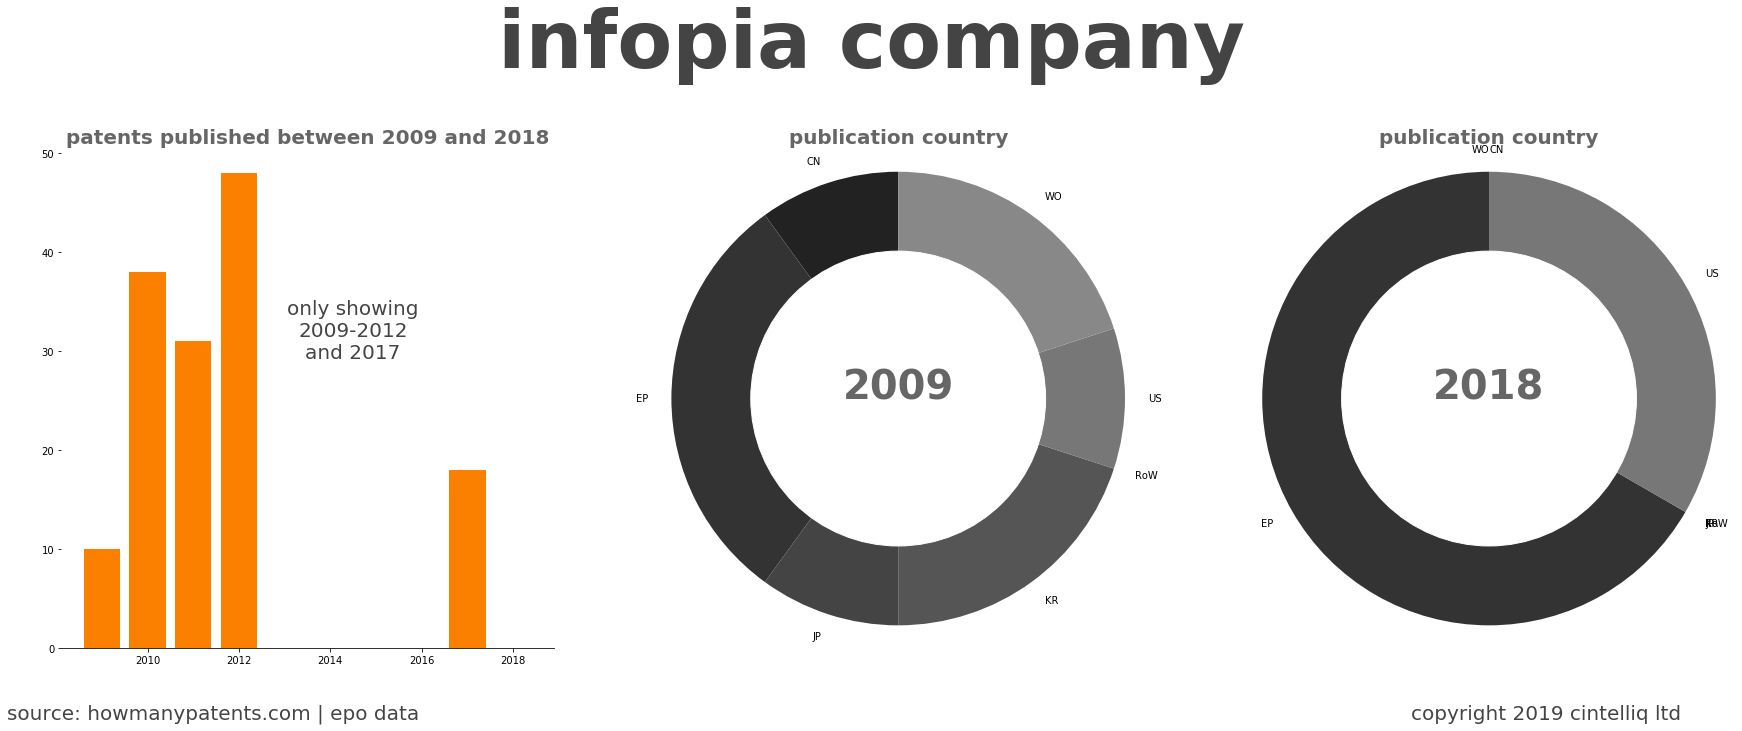 summary of patents for Infopia Company